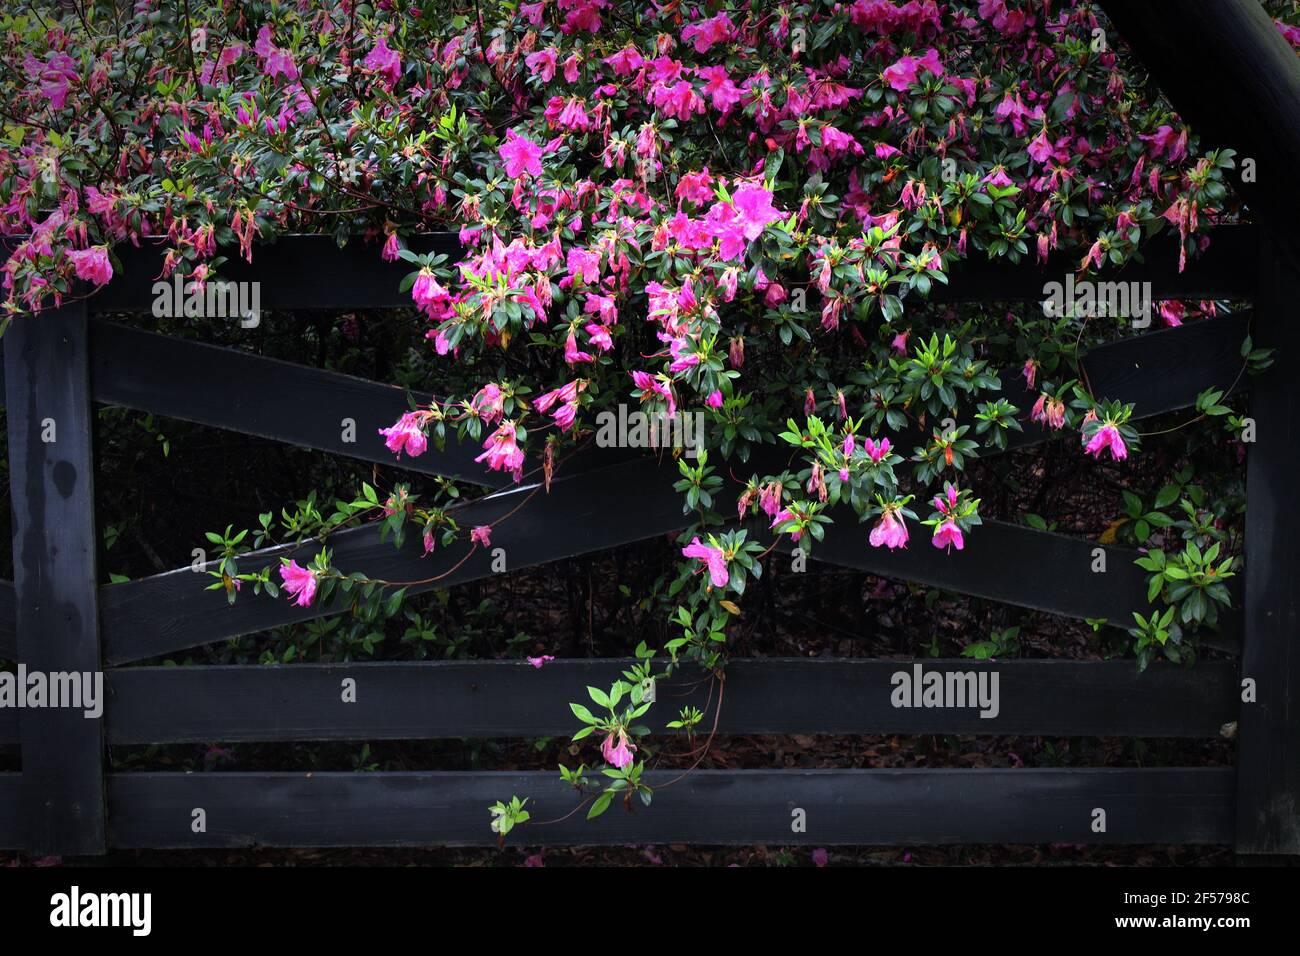 pink flowers tumble over a rustic black fence Stock Photo